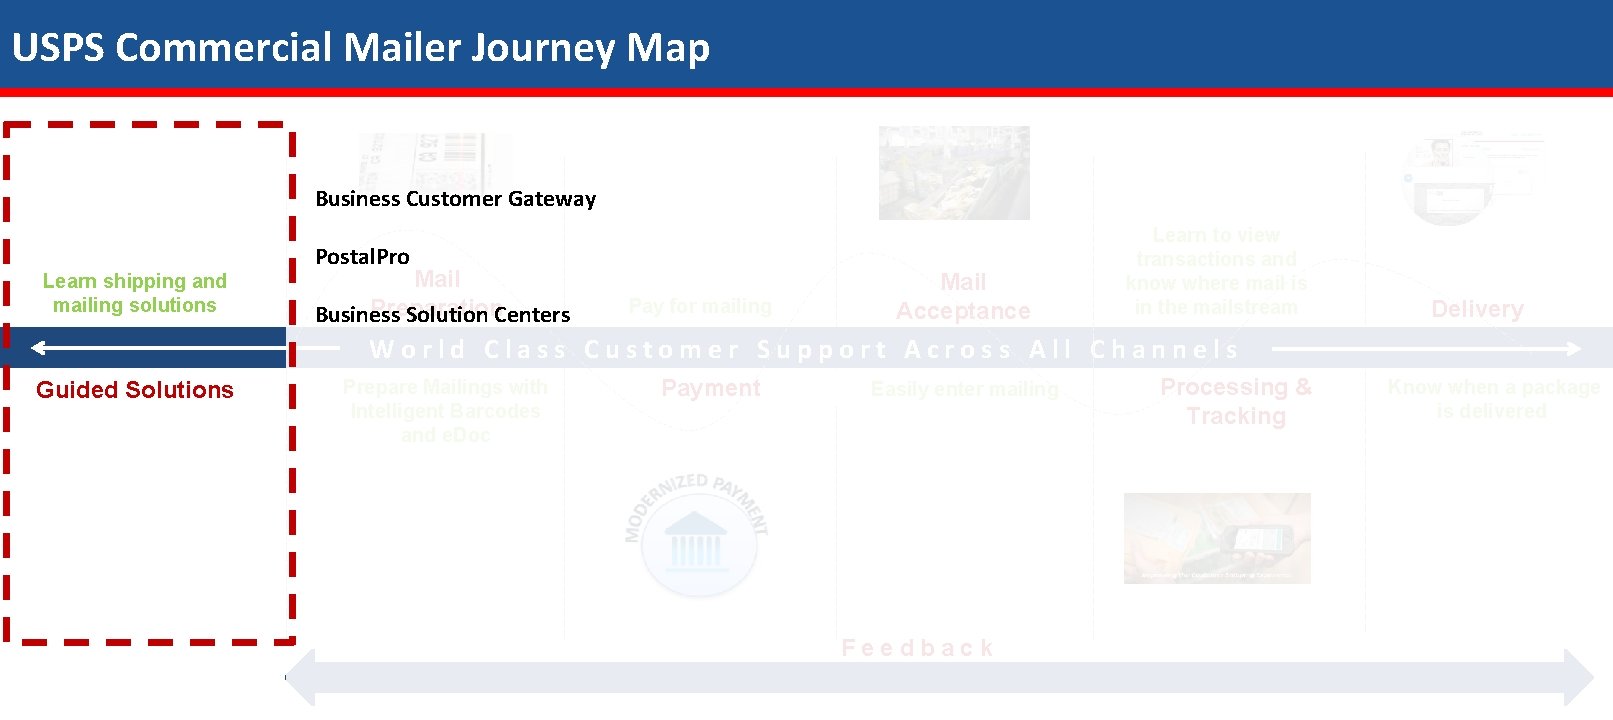 USPS Commercial Mailer Journey Map Business Customer Gateway Learn shipping and mailing solutions Postal.